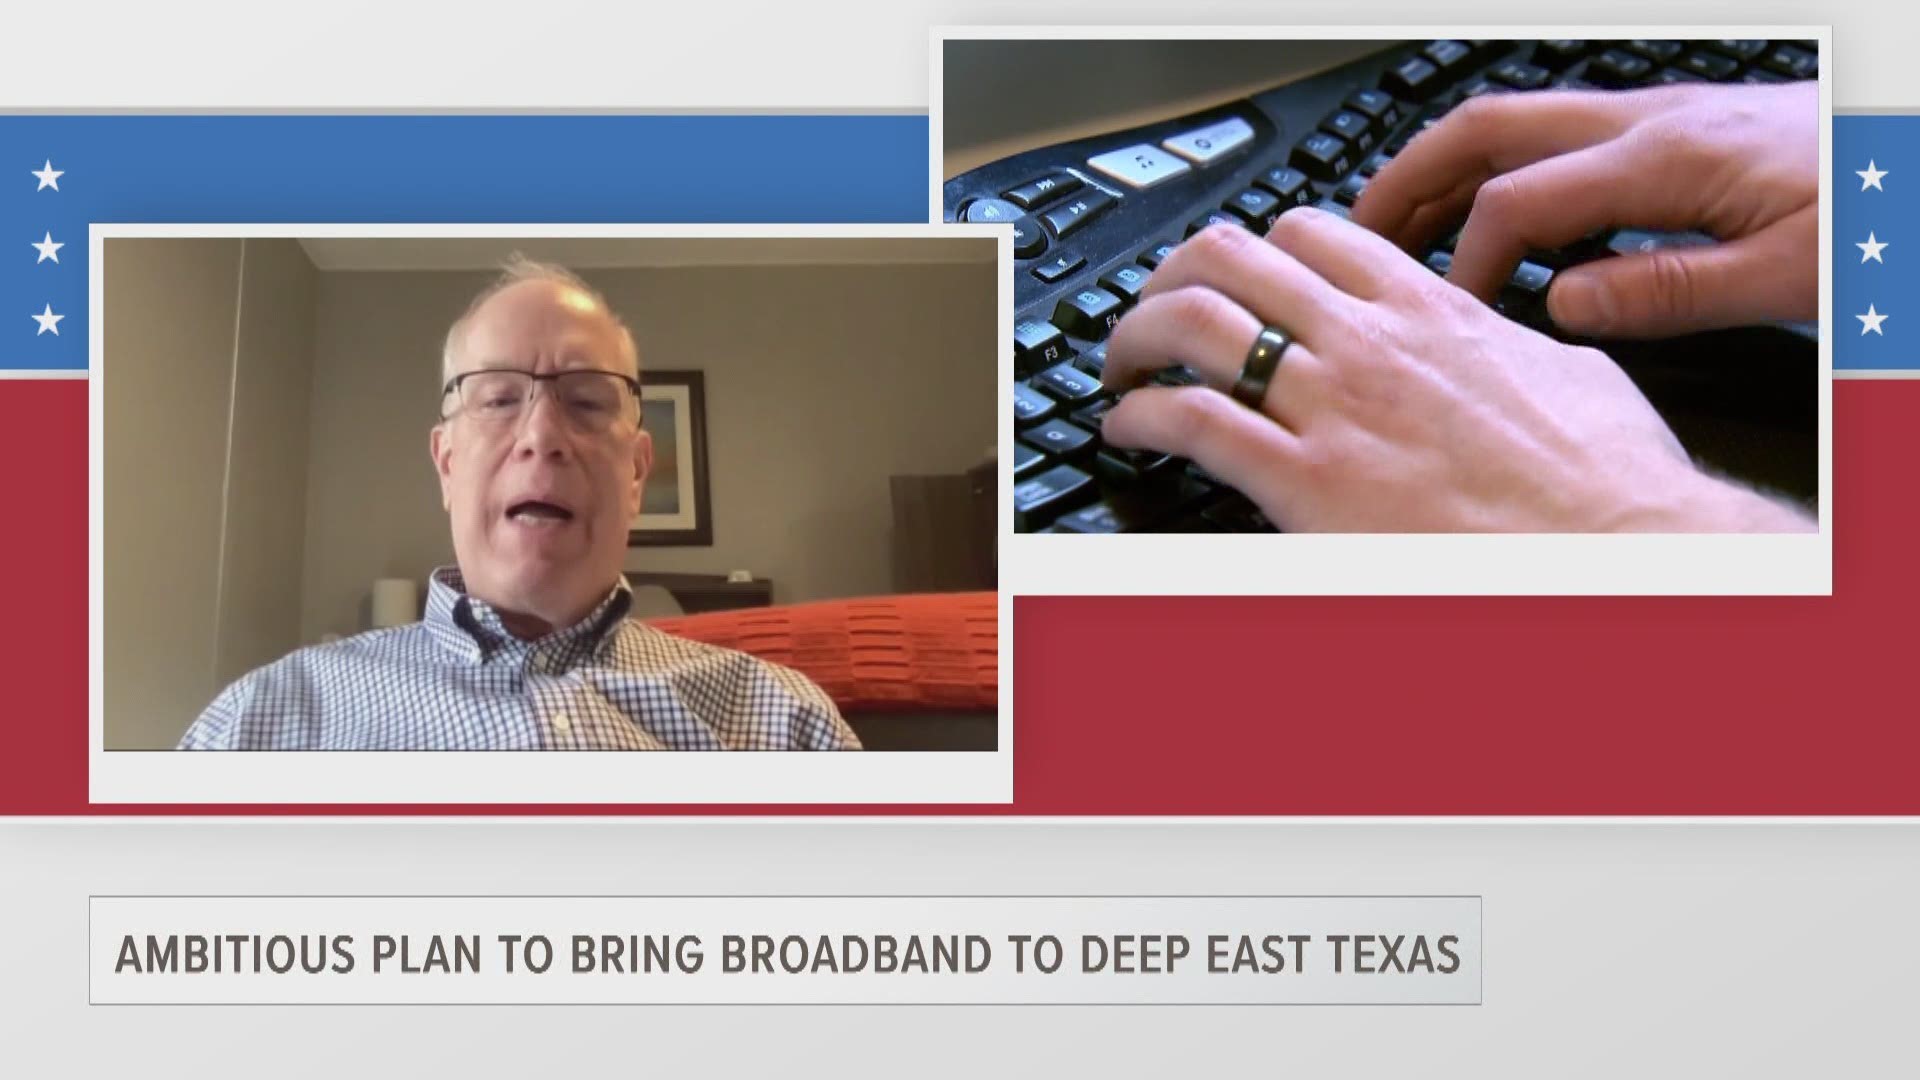 The executive director of the Deep East Texas Council of Governments talks about its bold plan to provide low-cost, high-speed internet access to the entire region